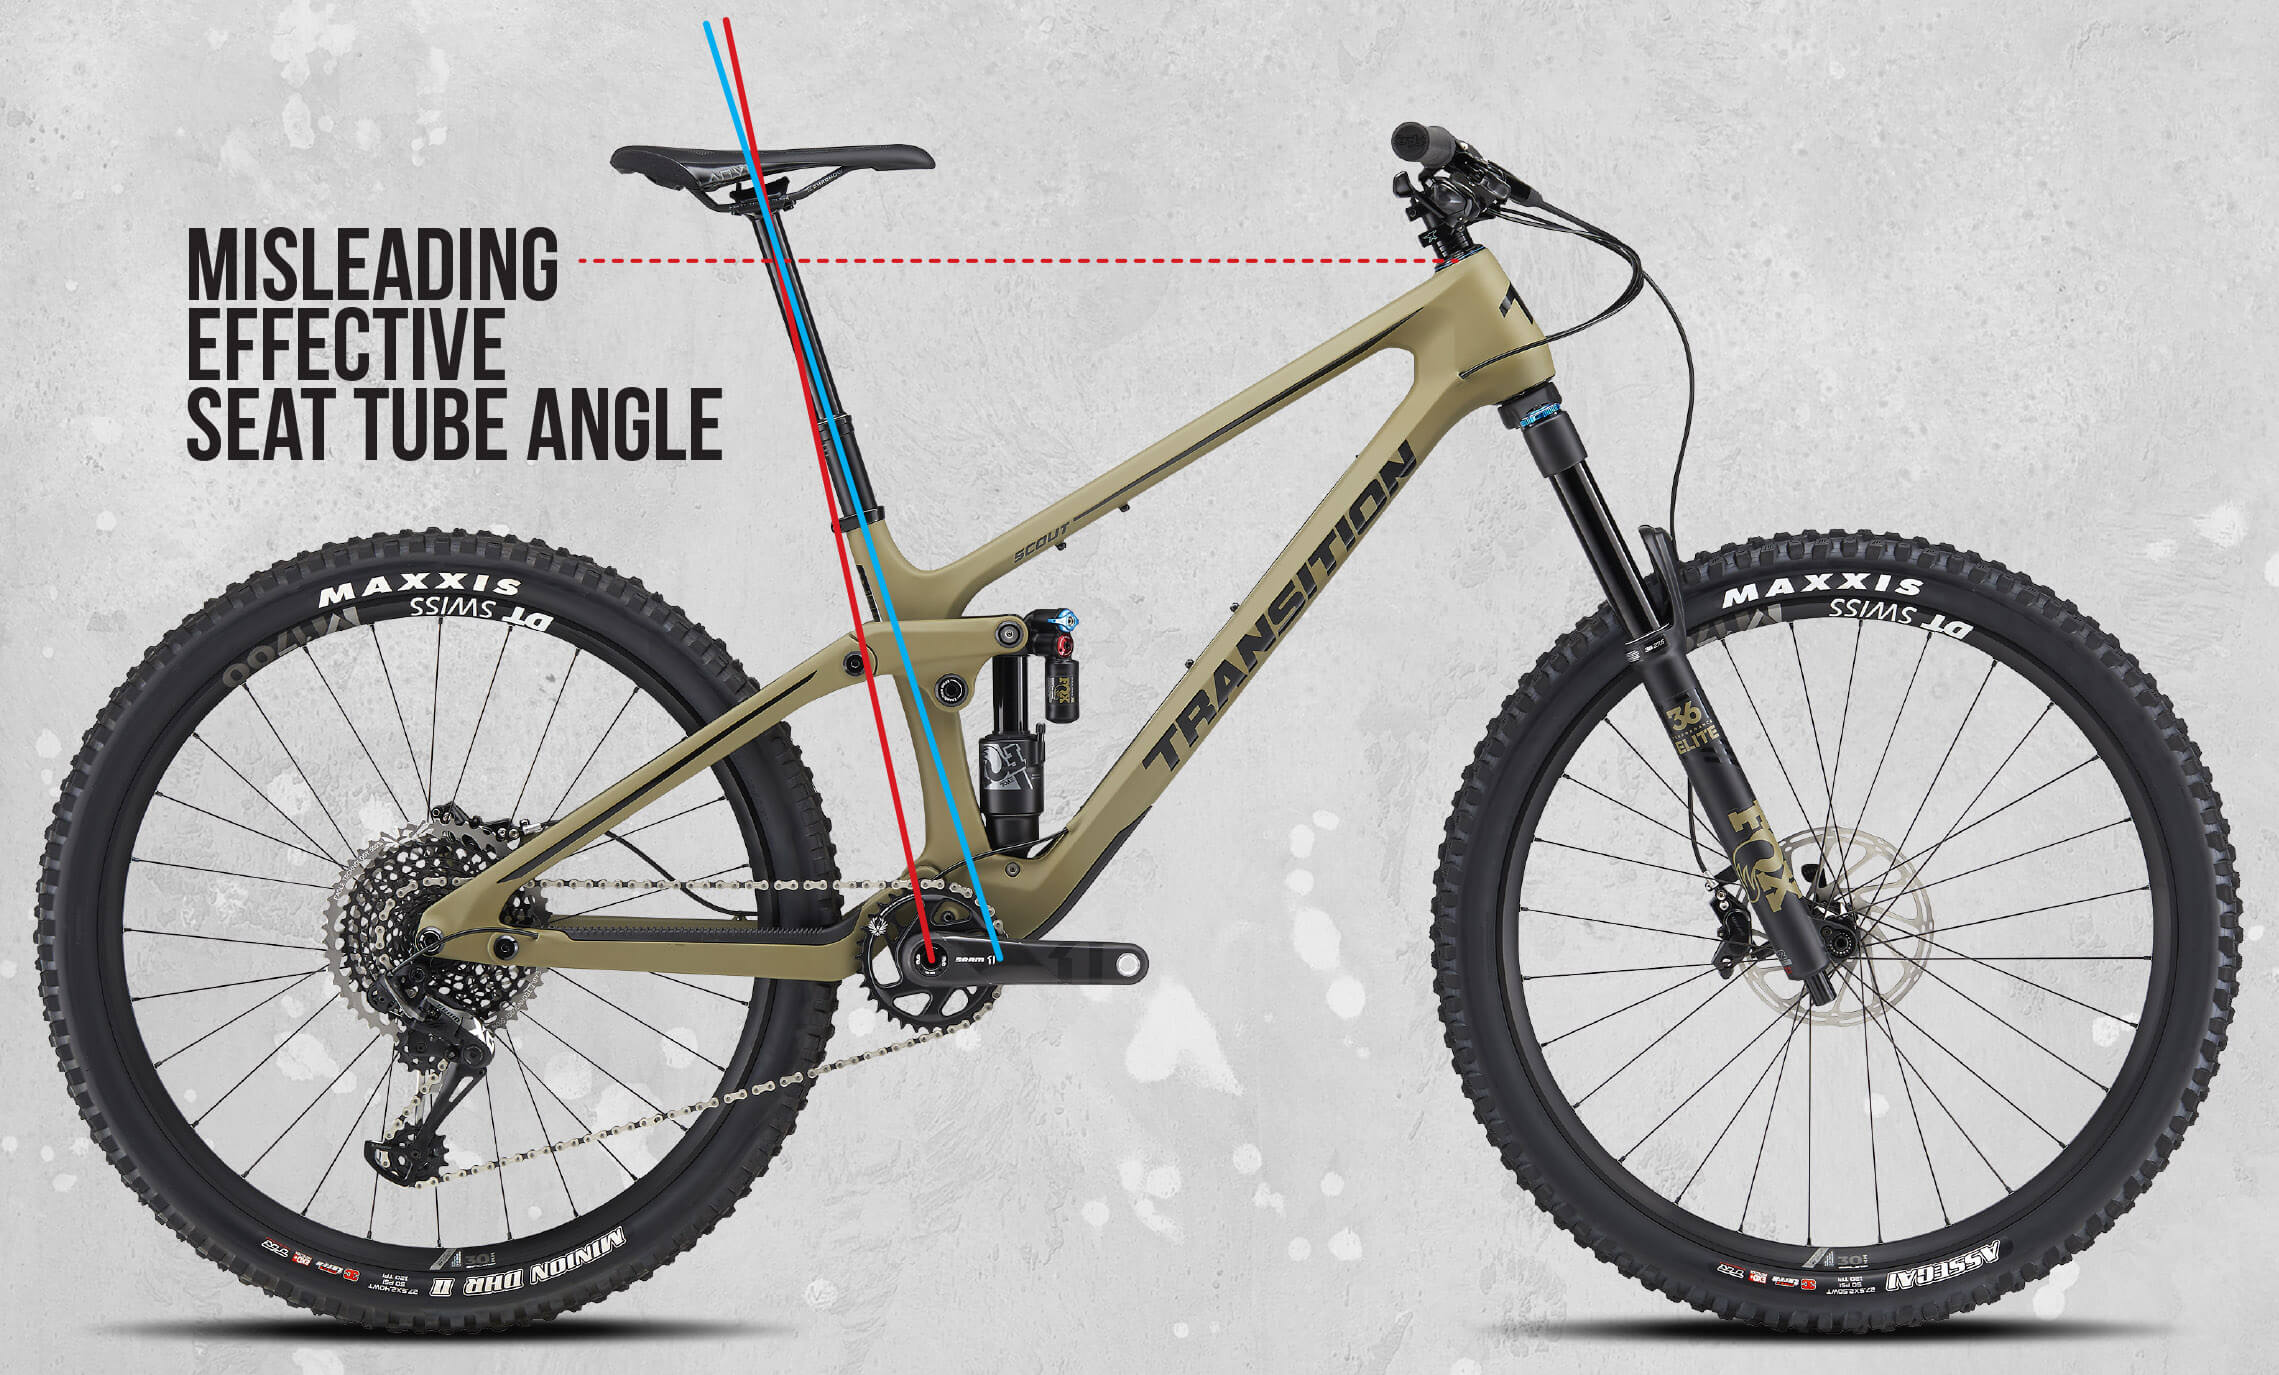 Transition Bikes - It's Time To